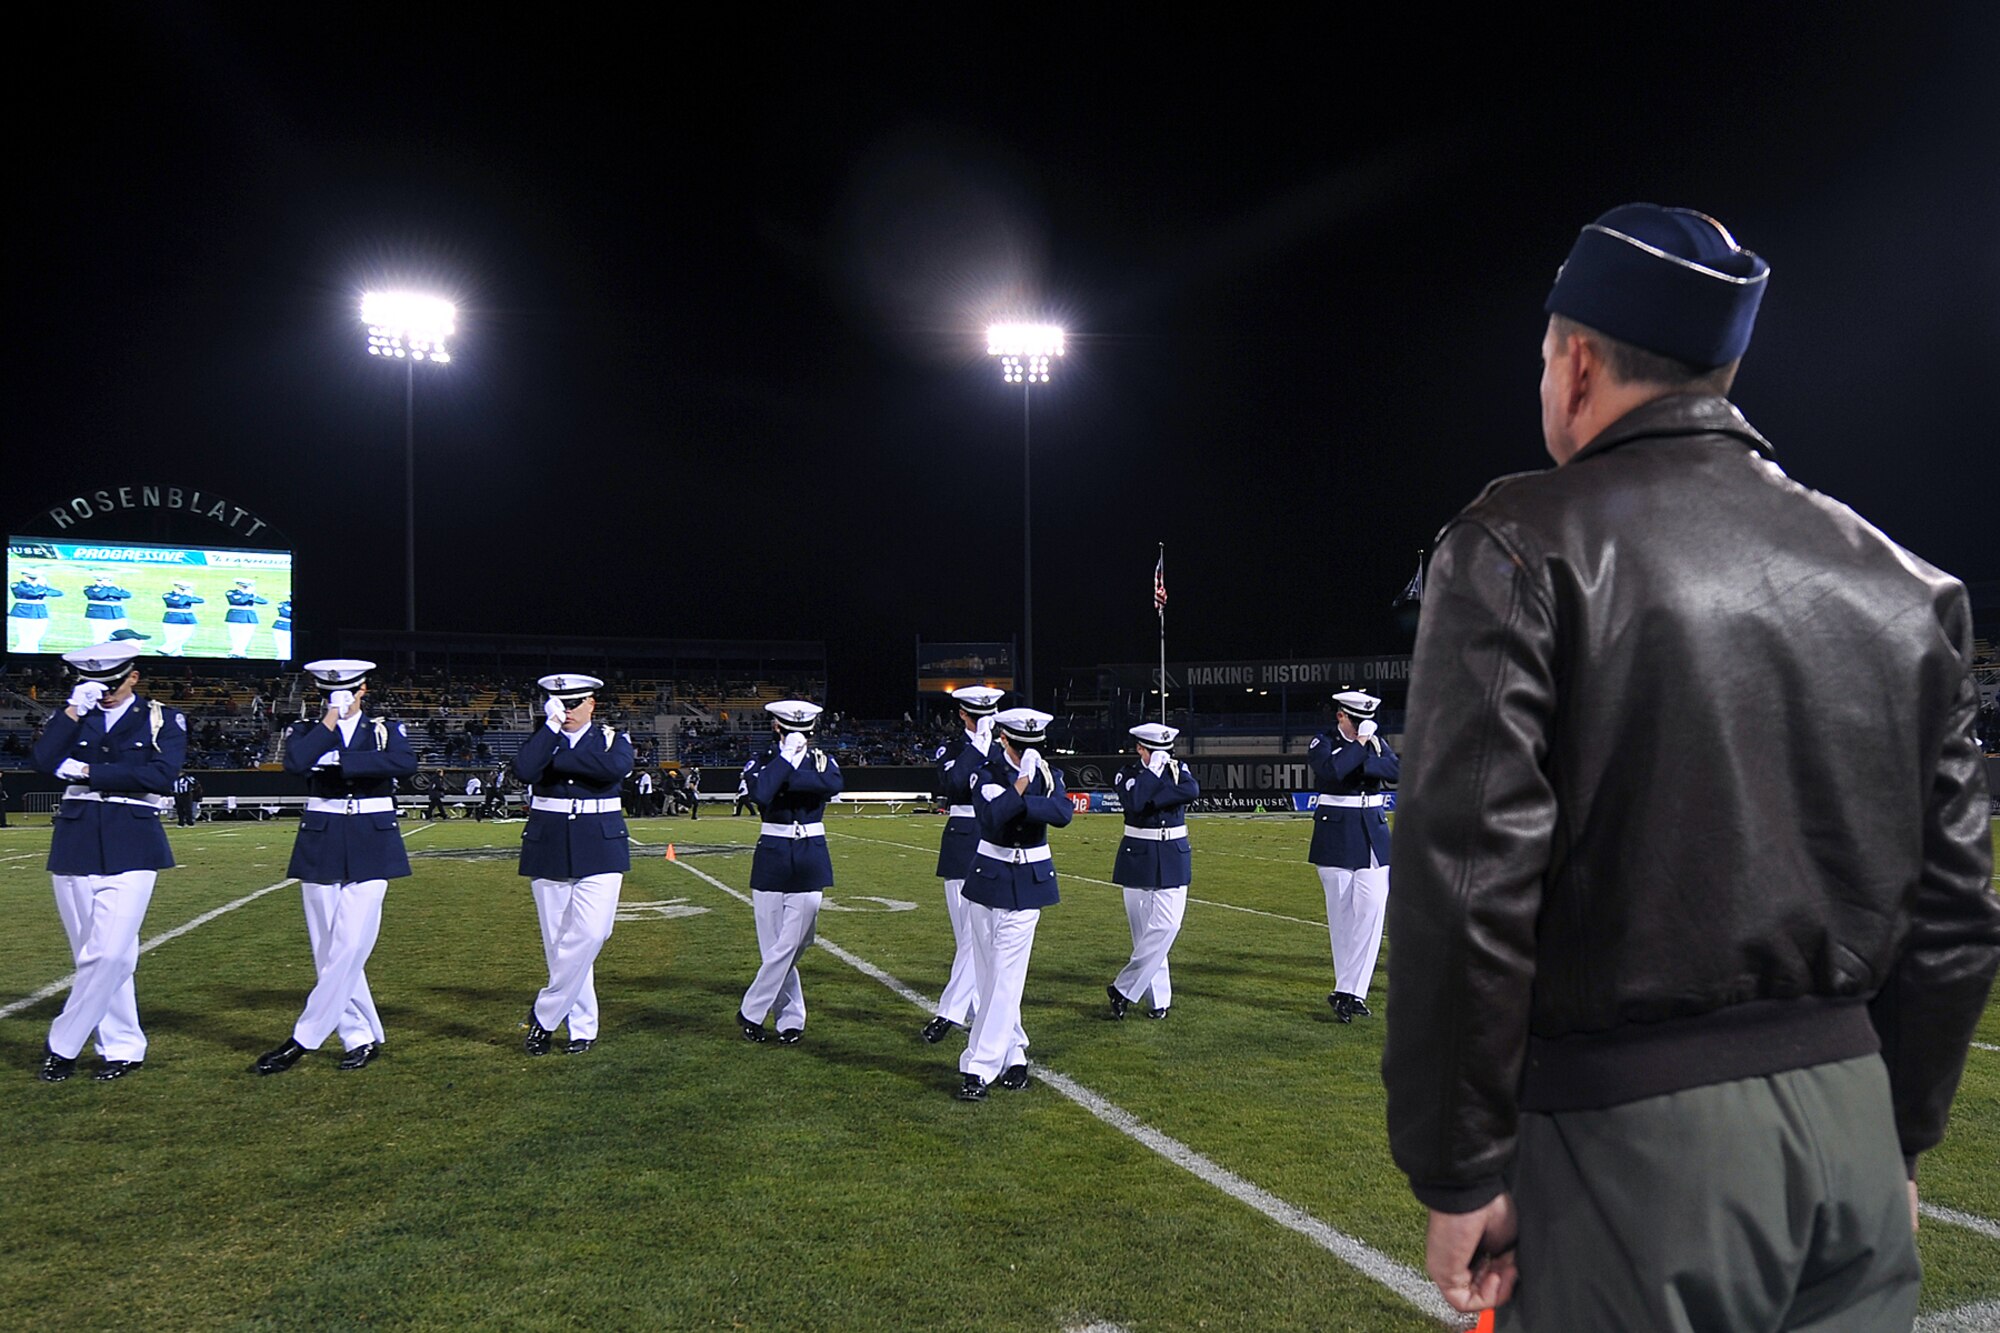 OFFUTT AIR FORCE BASE, Neb. - The Bellevue West High School Air Force Junior ROTC drill team performs while Brig. Gen. John N.T. Shanahan, 55th Wing commander, watches their drill movements during the Omaha Nighthawks military appreciation game at the Rosenblatt Stadium Nov. 19. Military members from all branches were celebrated at the game, which ended with a Florida Tuskers win 27 - 10. U.S. Air Force Photo by Charles Haymond (Released) 